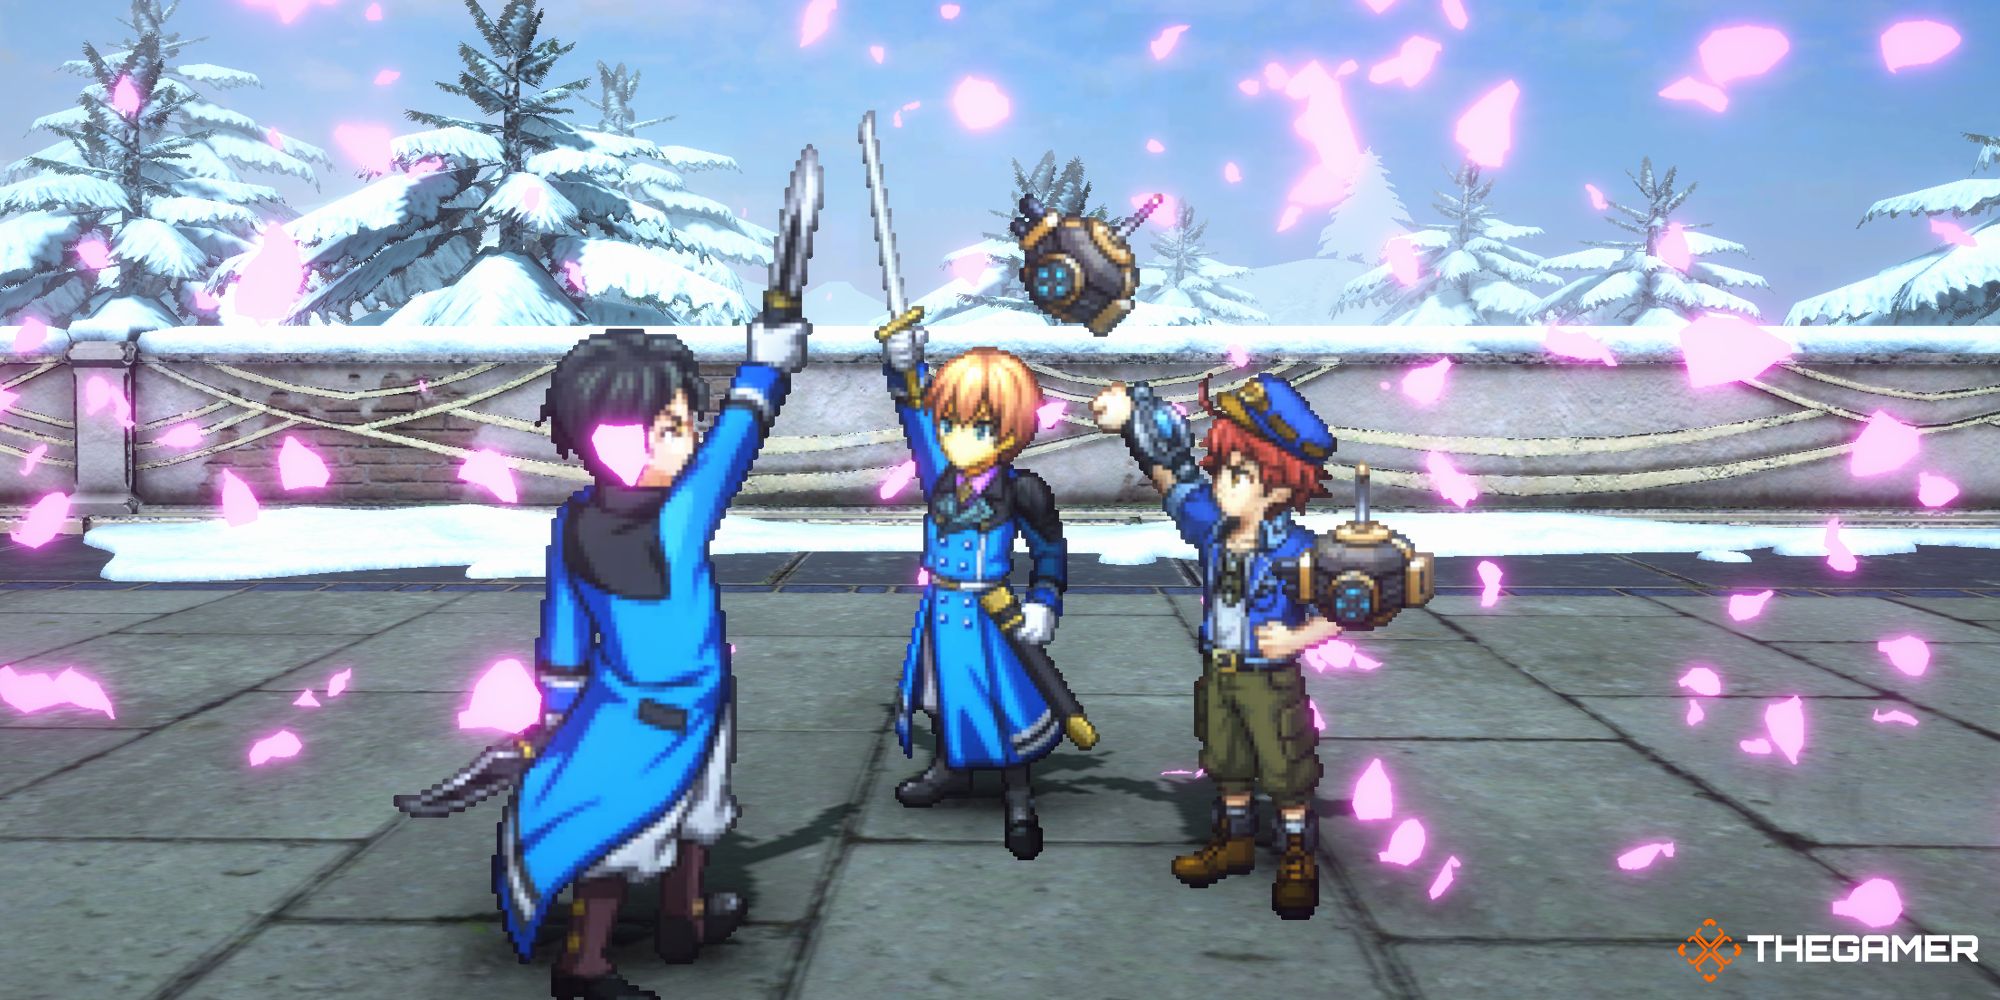 Feature image of Eiyuden Chronicle characters Seign, Valentin, and Pohl preparing their Young Imperials Hero Combo attack